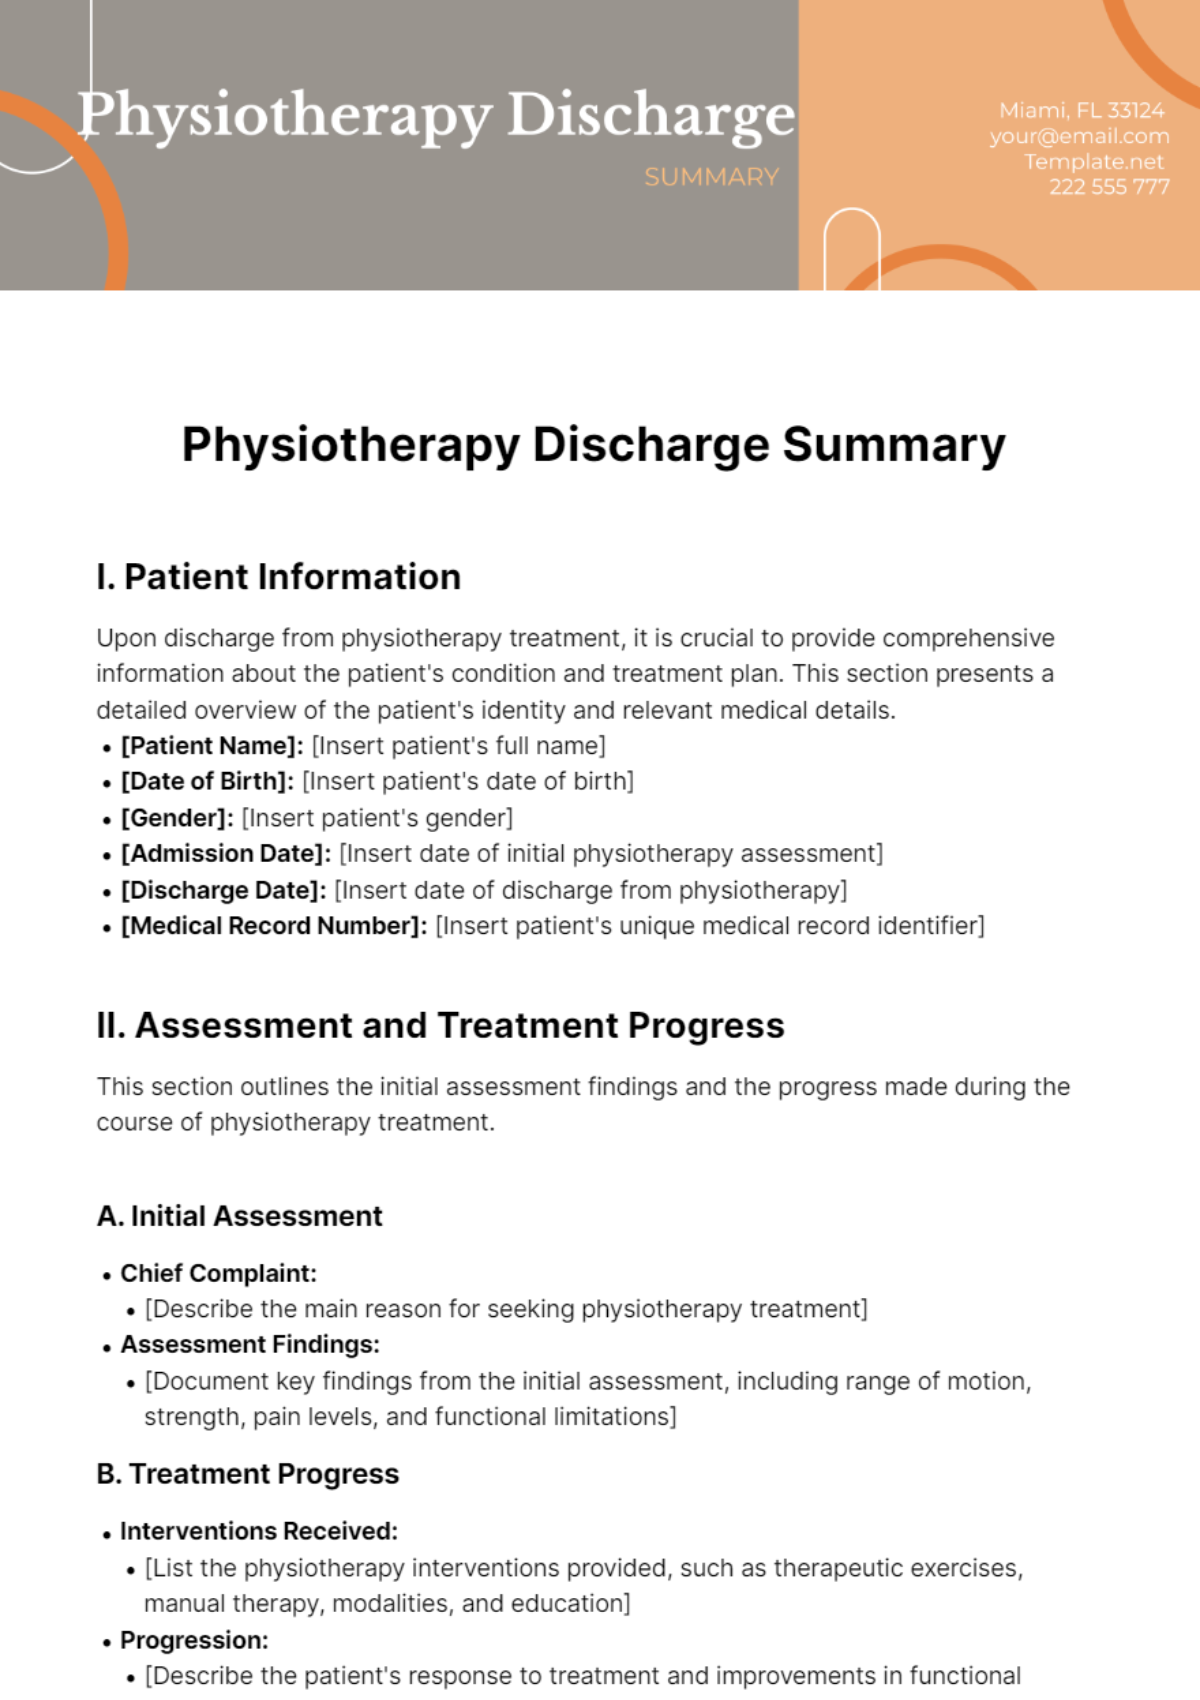 Physiotherapy Discharge Summary Template